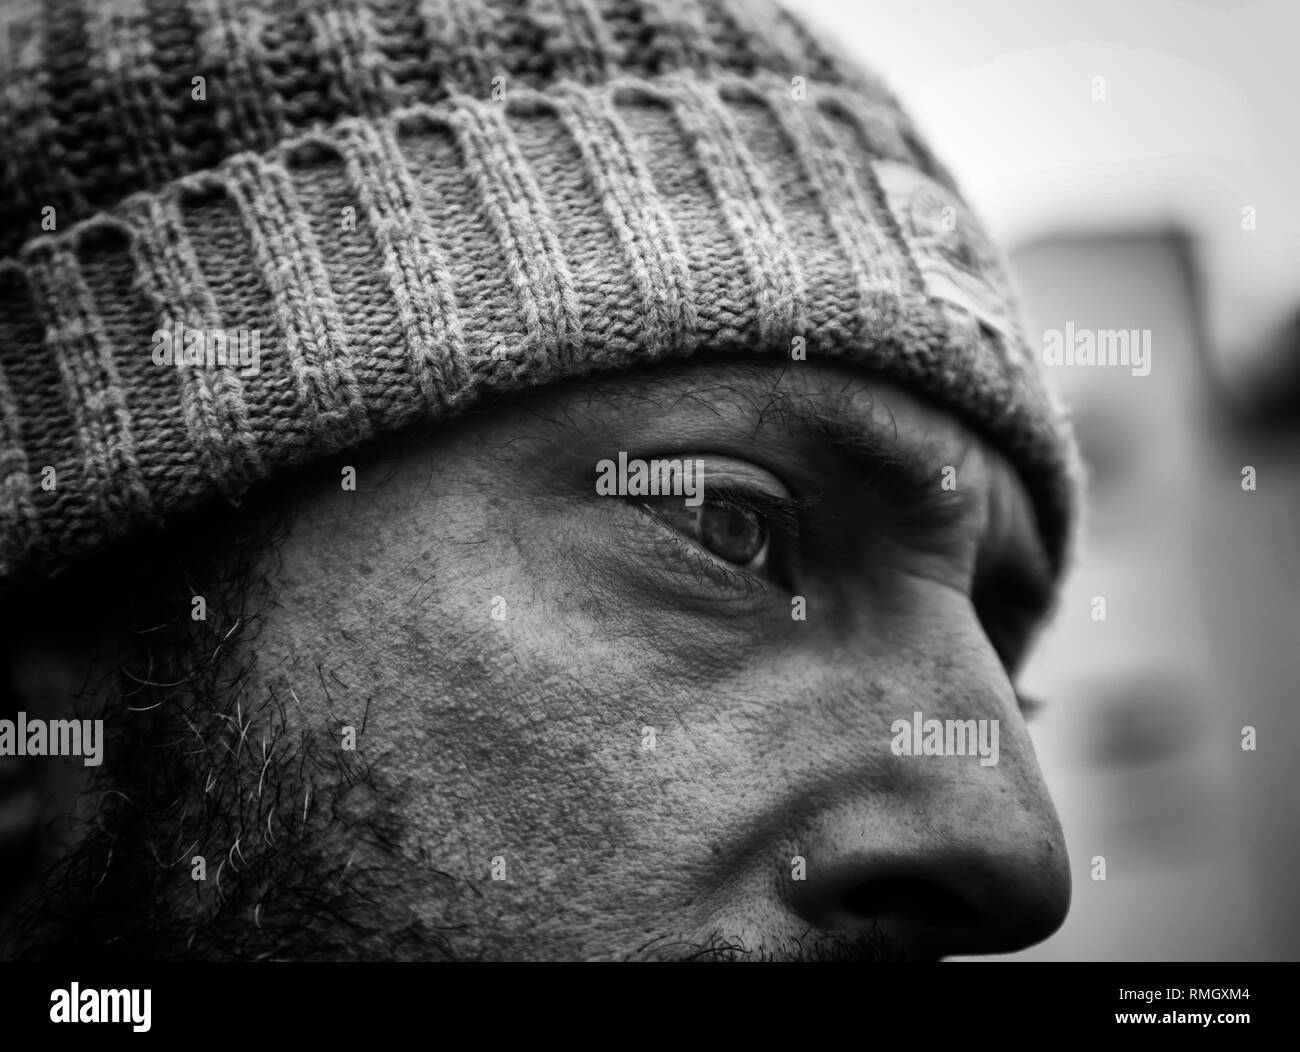 Man of street gang, delinquency and drugs, violence Stock Photo